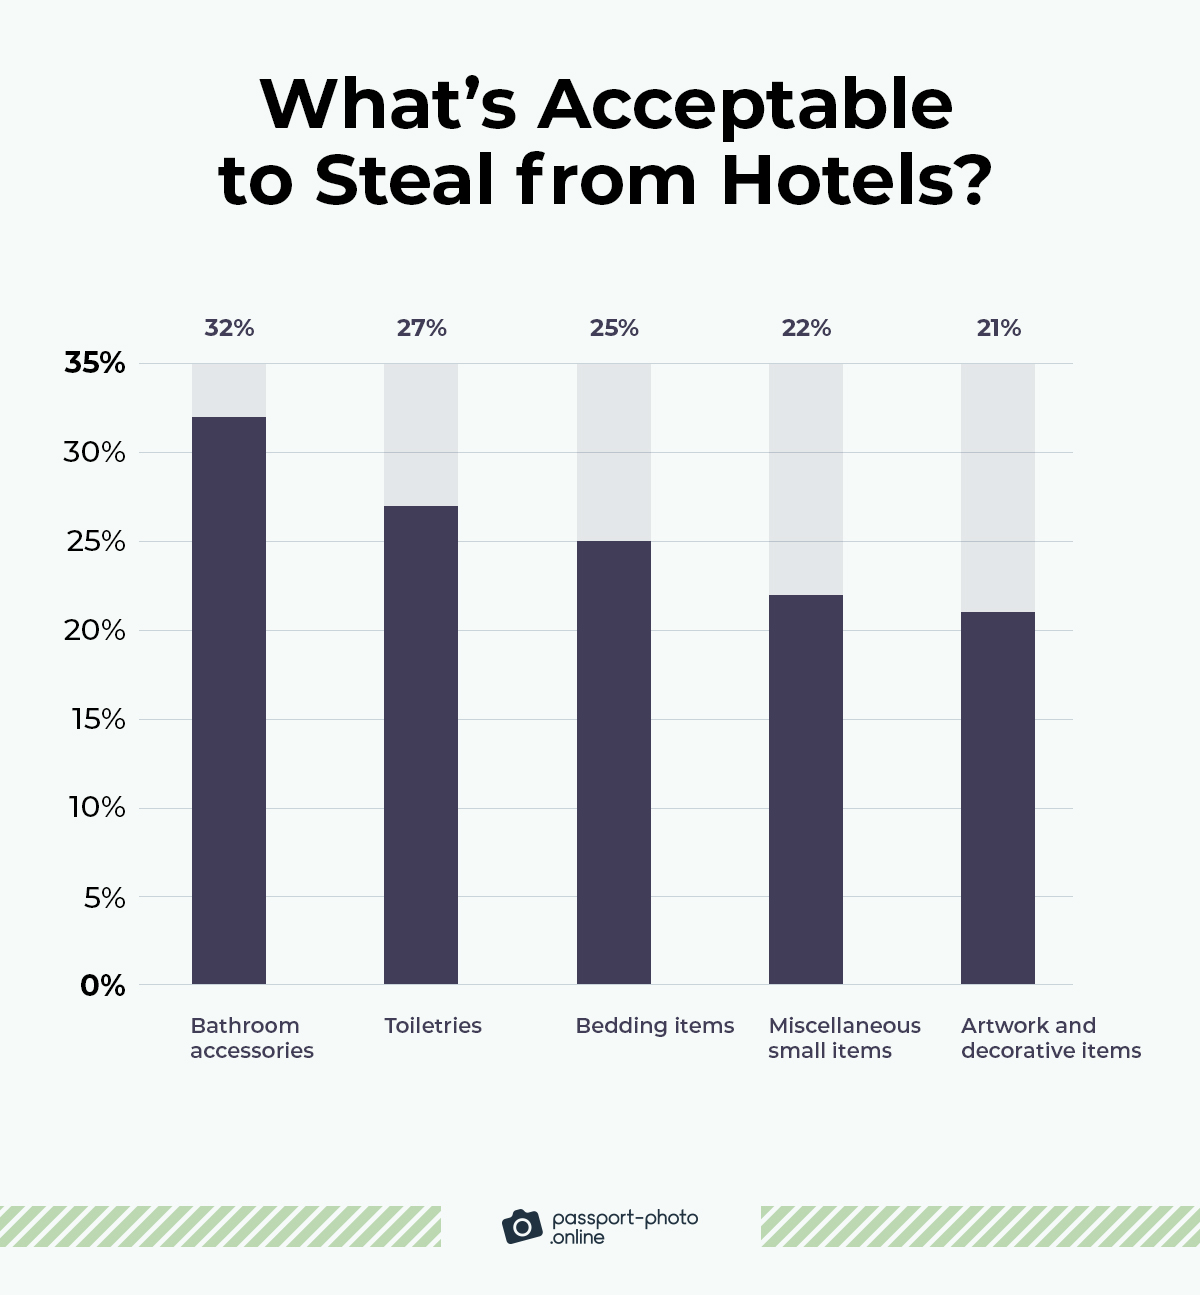 bathroom accessories (30%), toiletries (29%), and mini-bar contents (29%) are the top "acceptable” objects to take from hotels